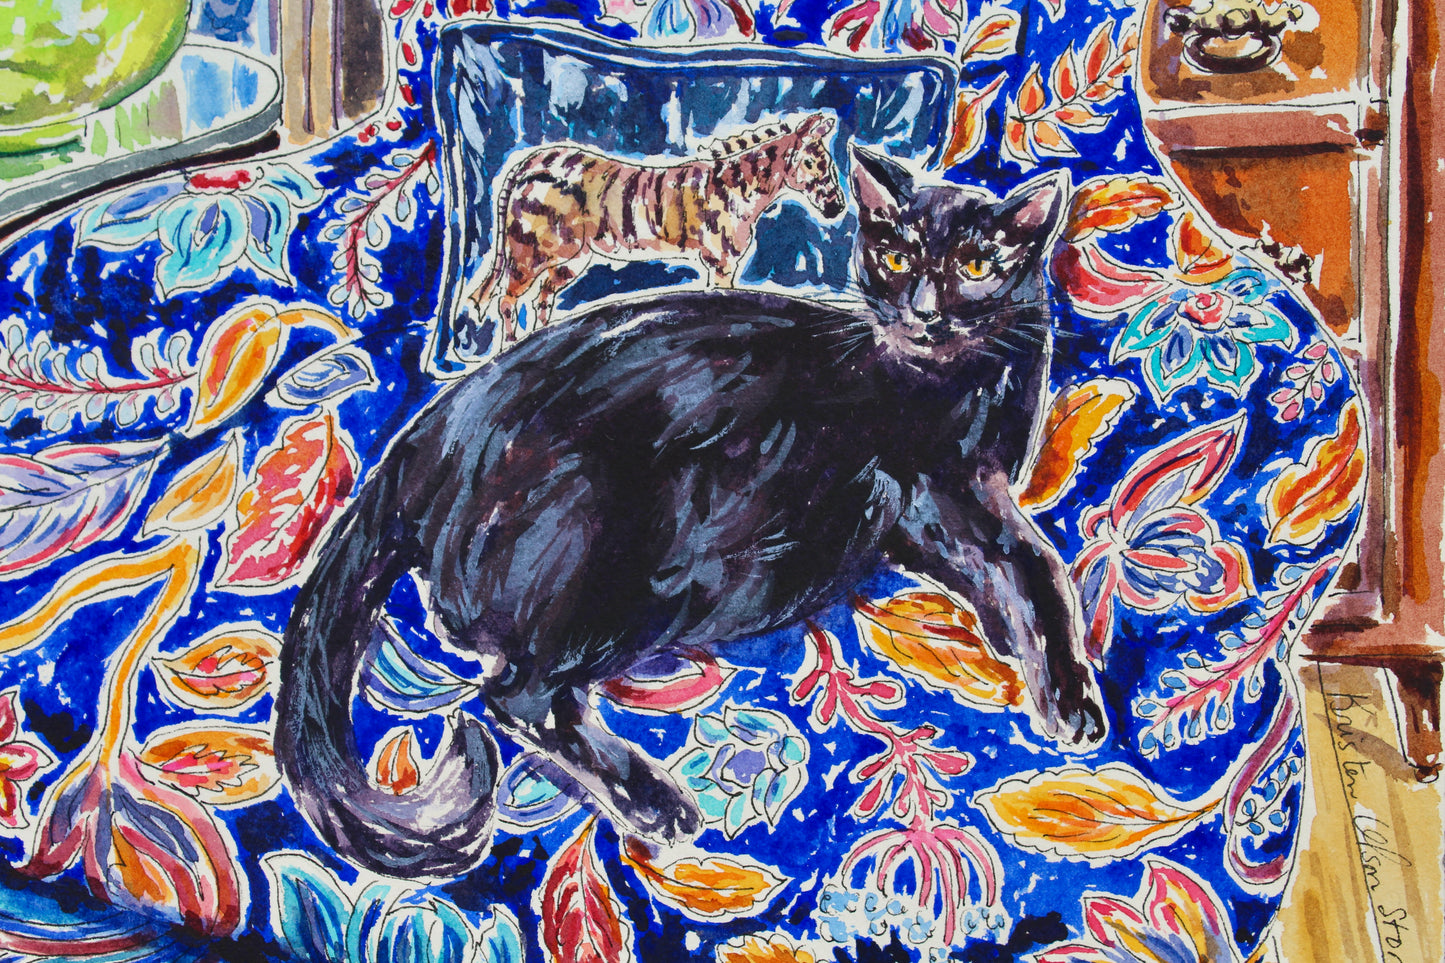 You Called?, An Original  12" x 9" Watercolor And Ink Painting Of A Black Cat On A Colorful Blue Floral Chair